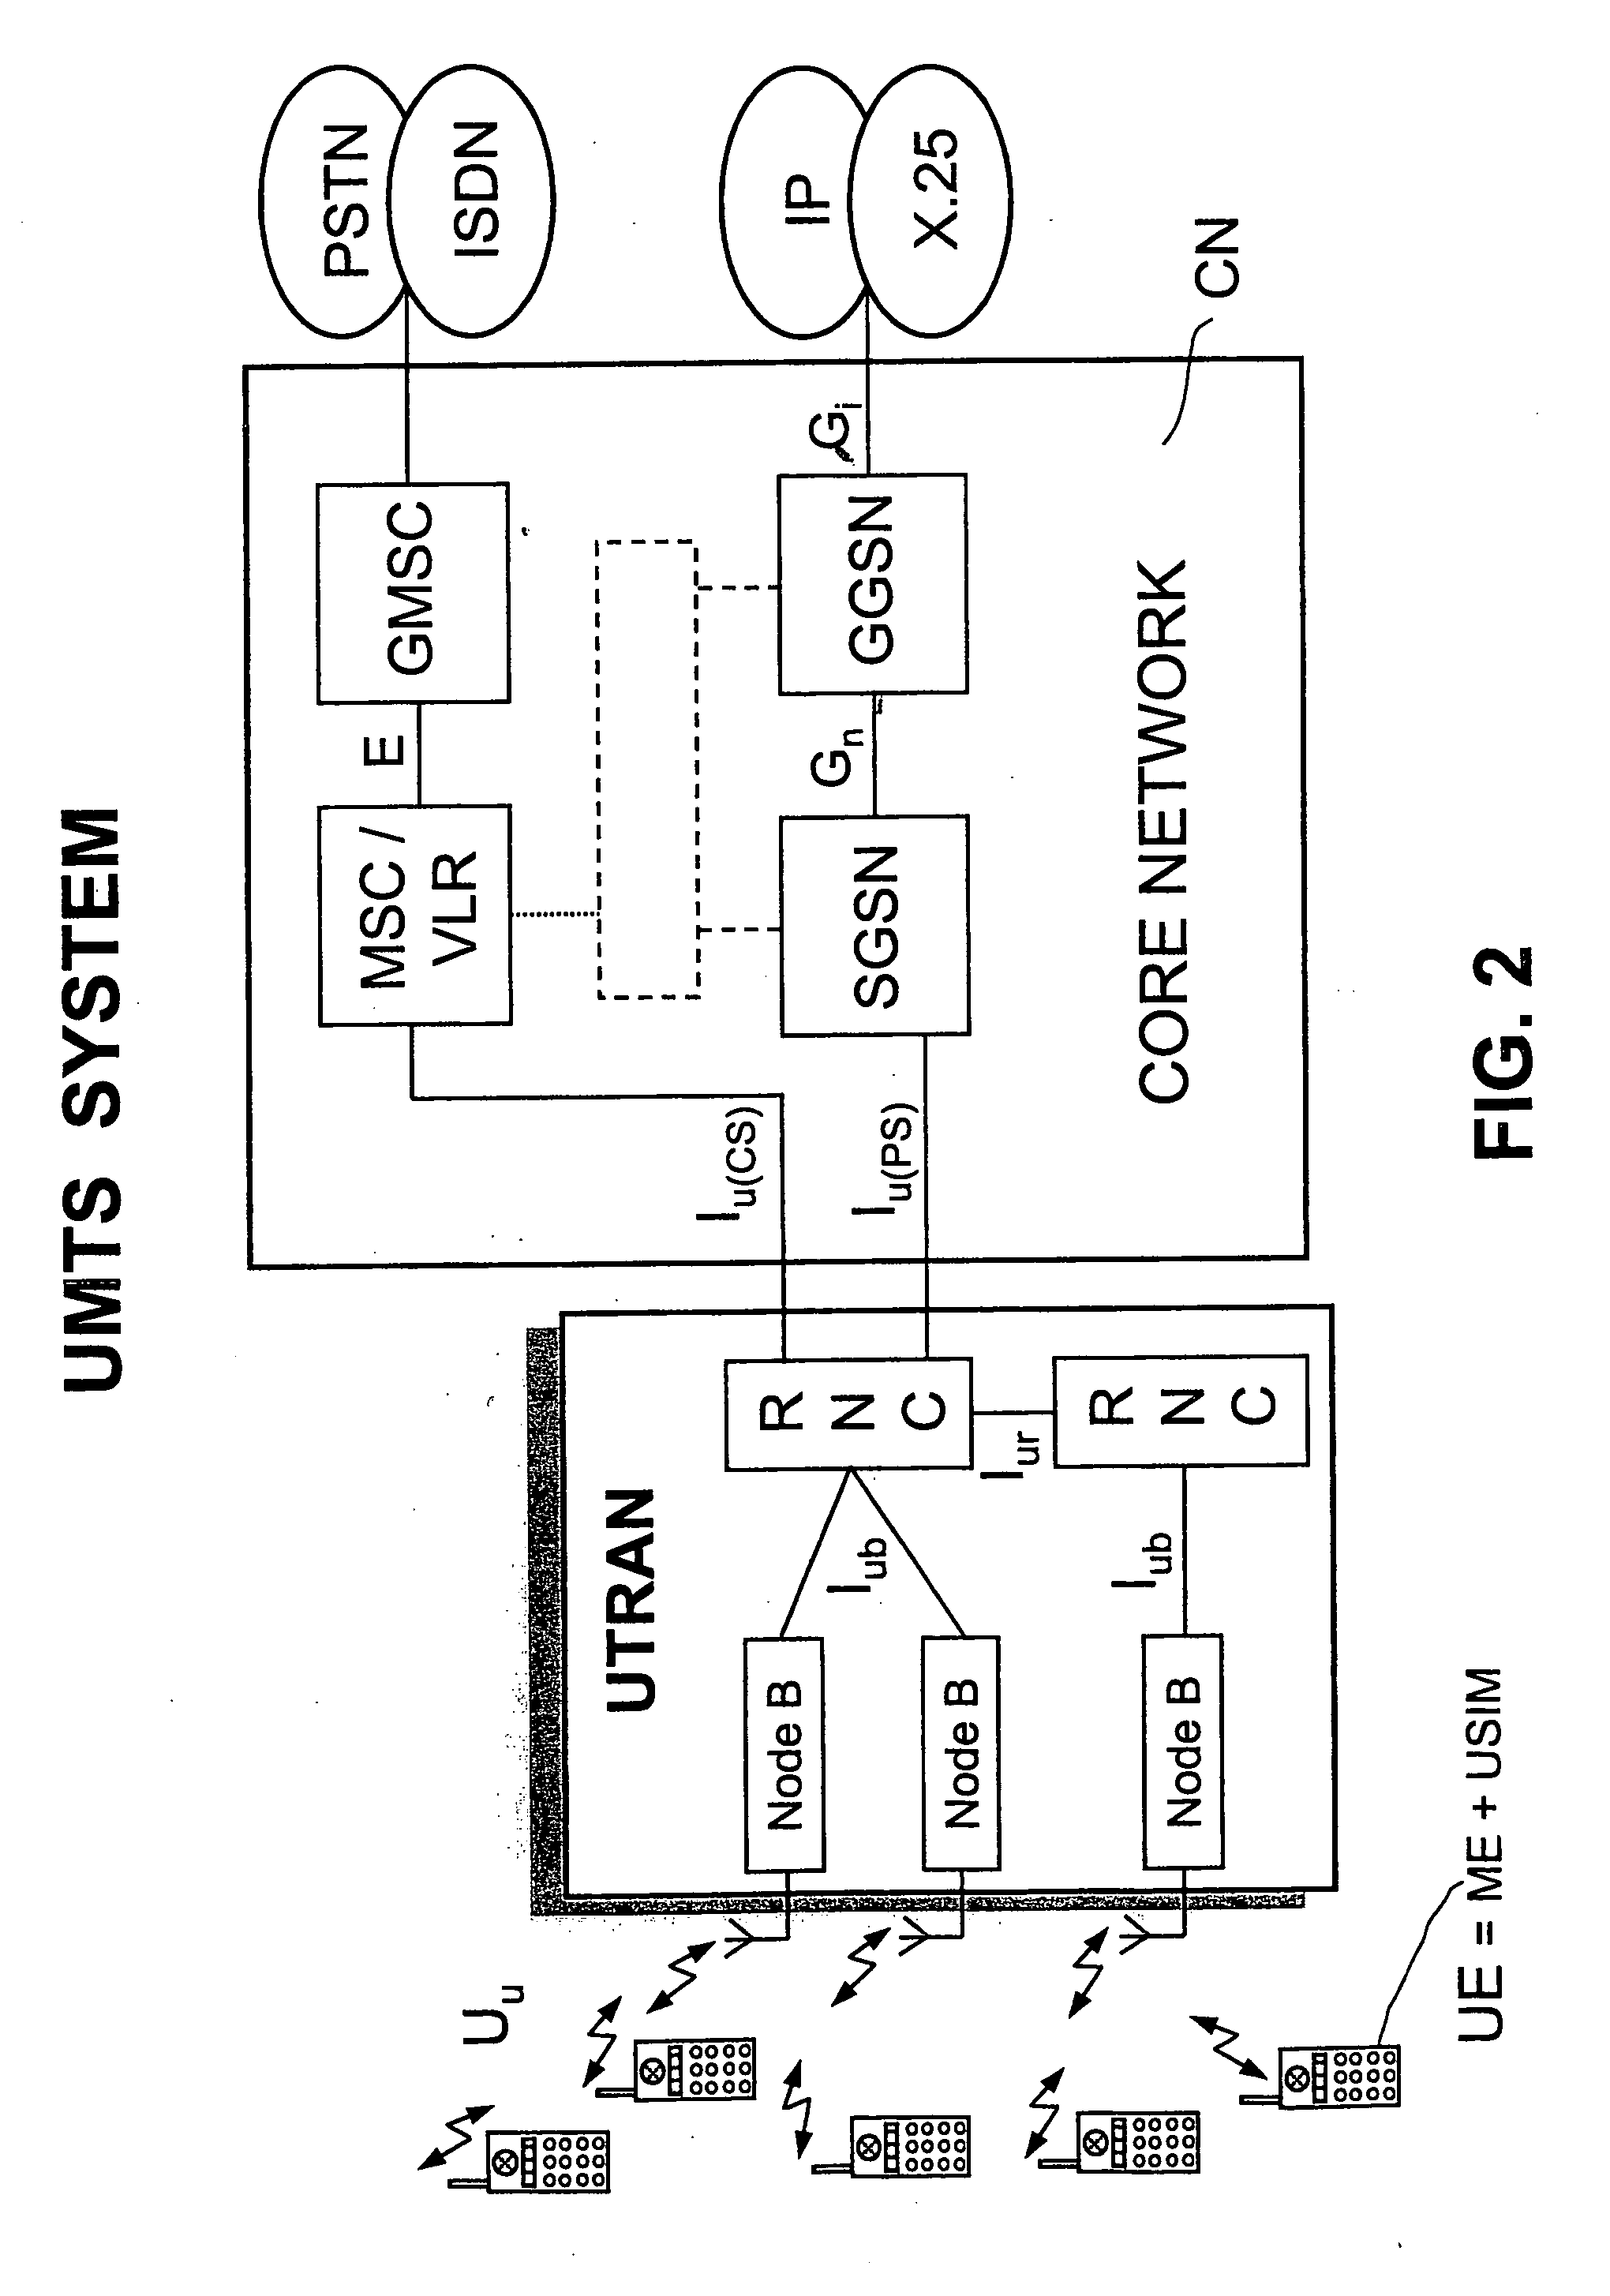 Method for transmitting multimedia services in the UMTS networks by immediate multicasting of a streaming subset